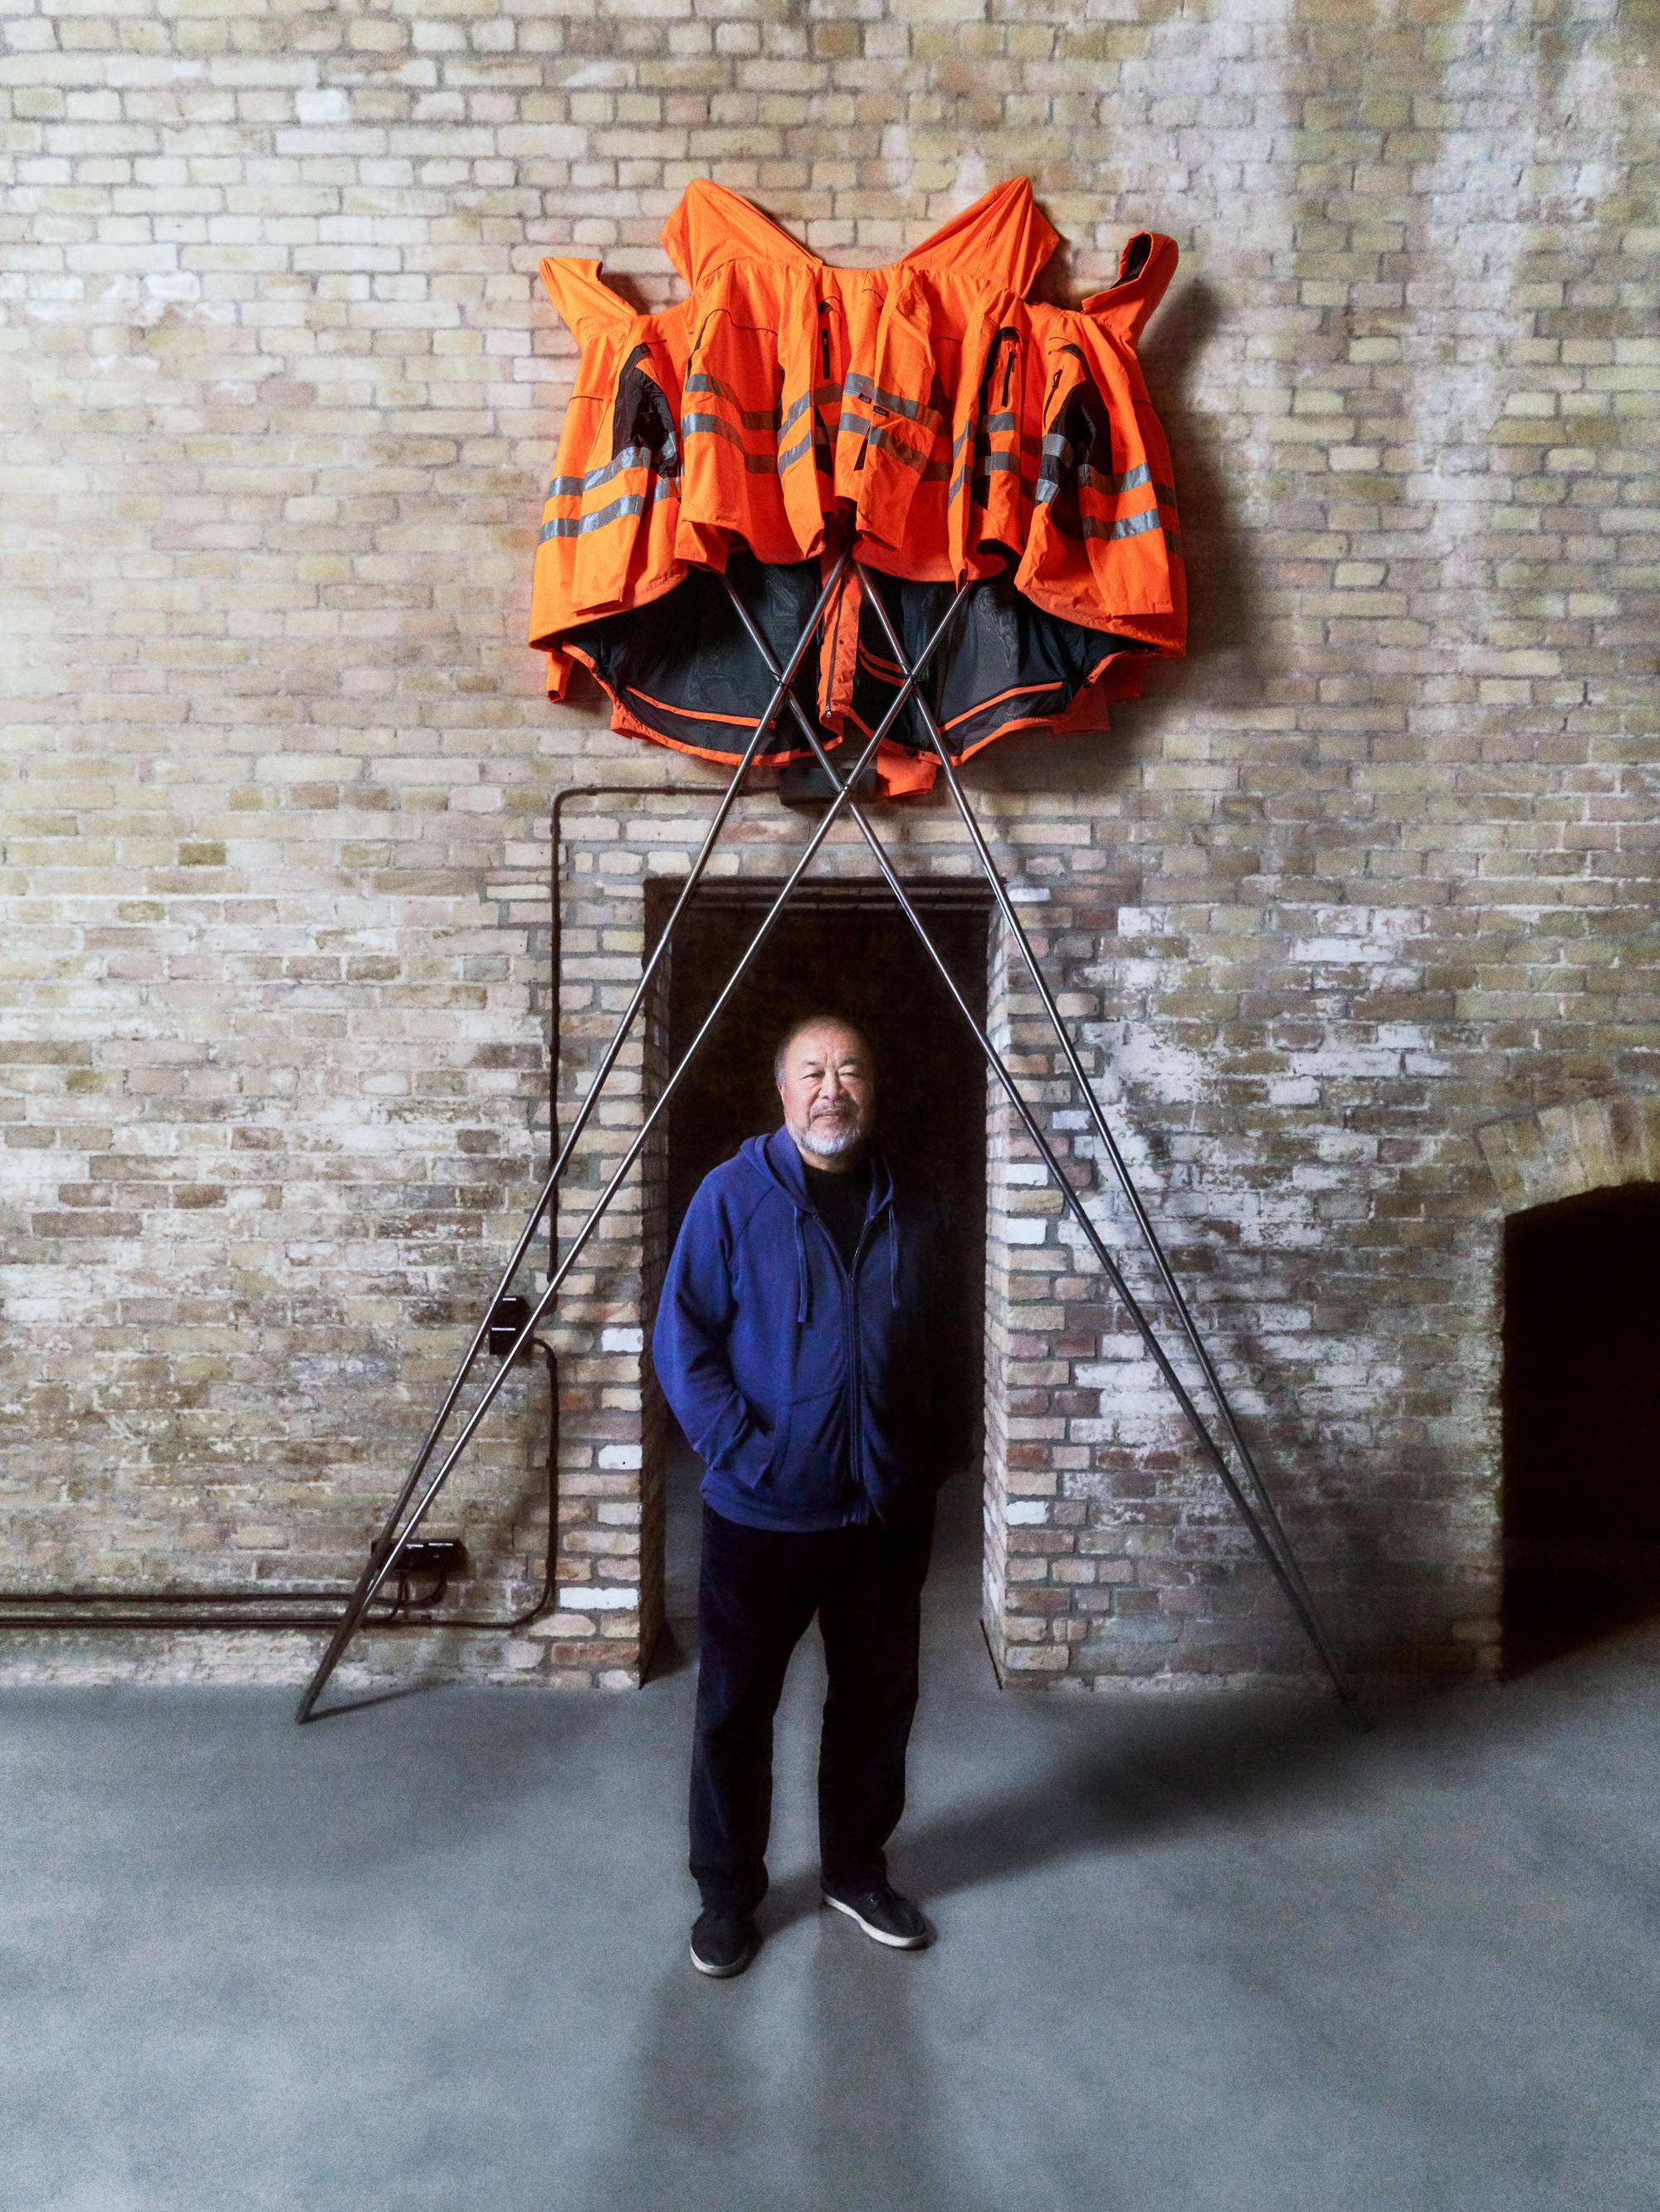 The artist Ai Weiwei and the work „Safety Jackets Zipped the Other Way”.